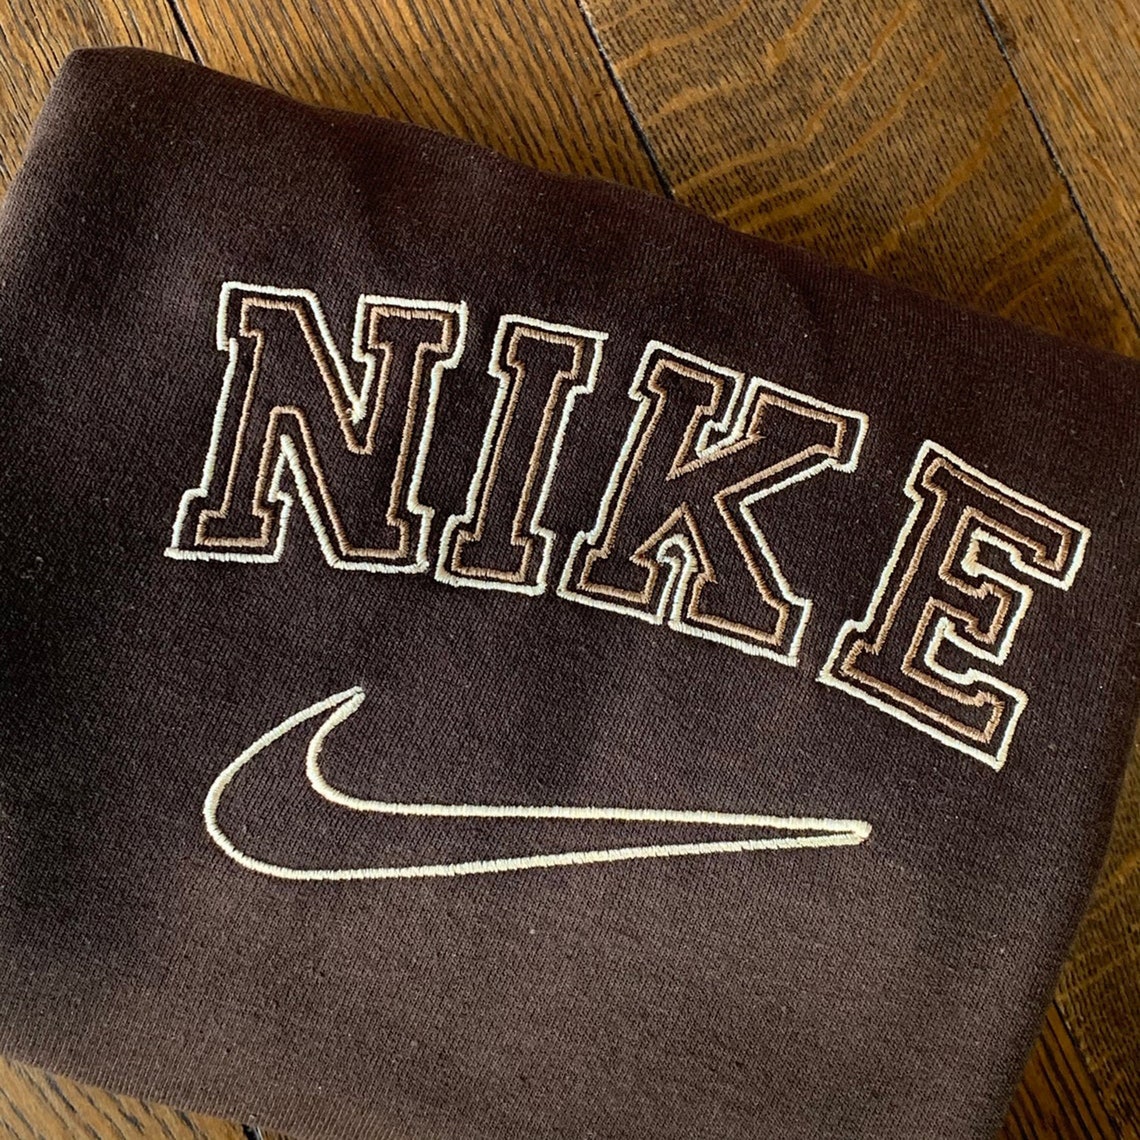 Vintage Nike Spell Out Embroidered Sweatshirt 90s Retro | Etsy